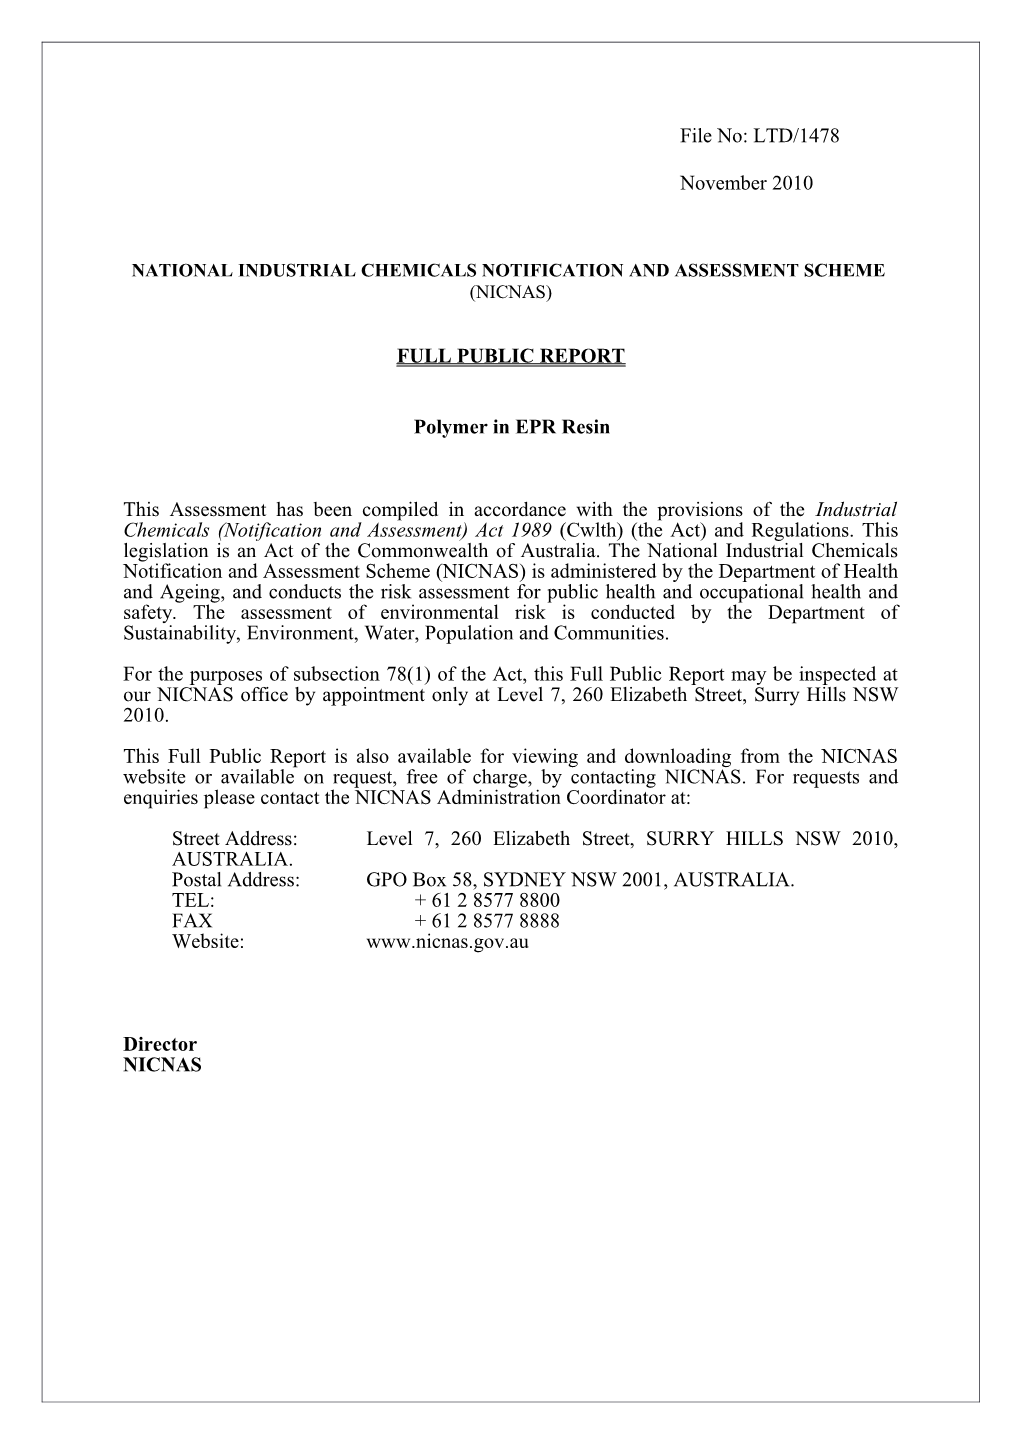 National Industrial Chemicals Notification and Assessment Scheme s18